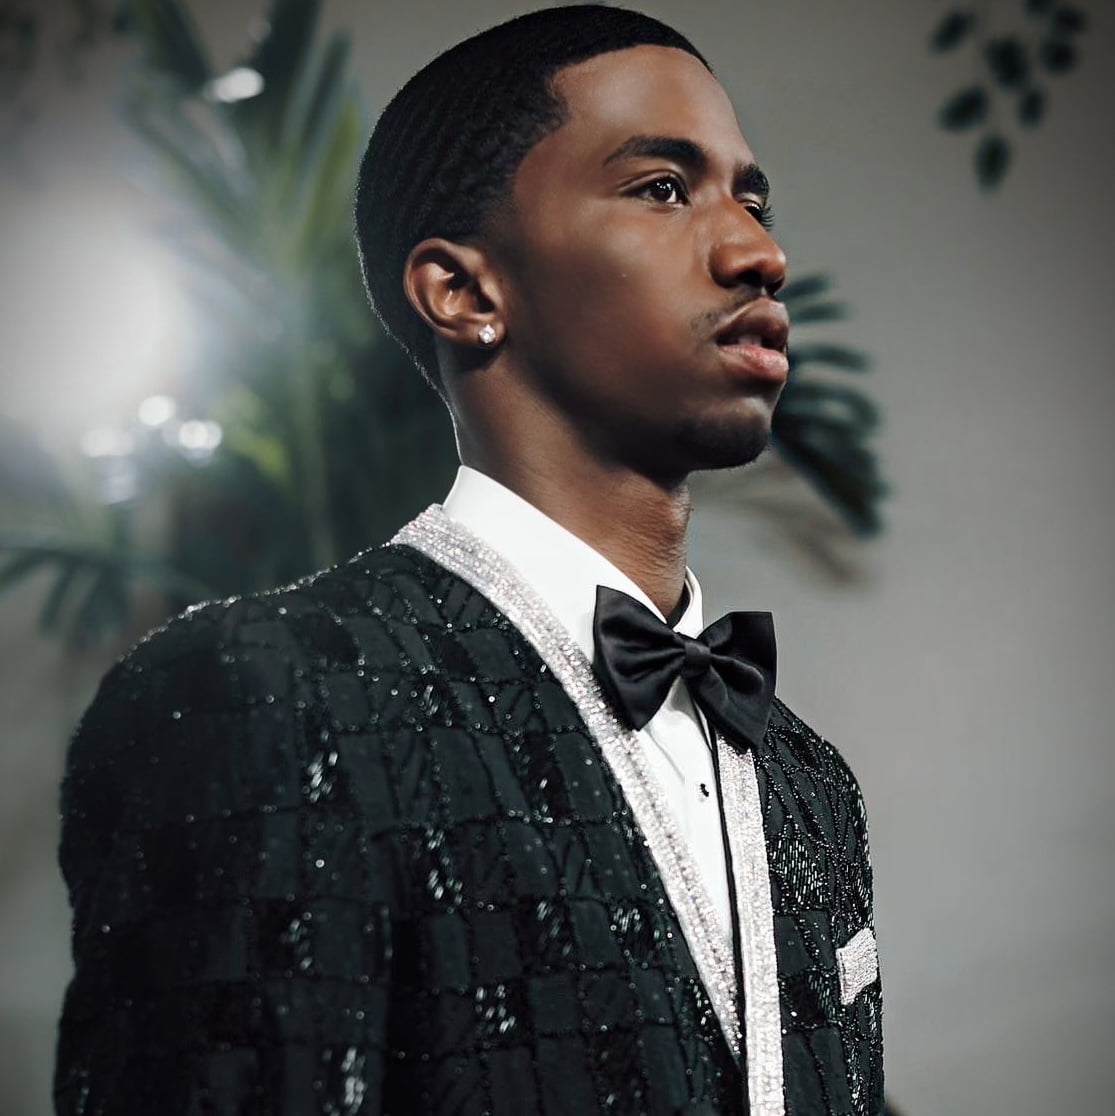 Diddy's son King Combs in Dolce&Gabbana at Art Basel via 360 MAGAZINE.